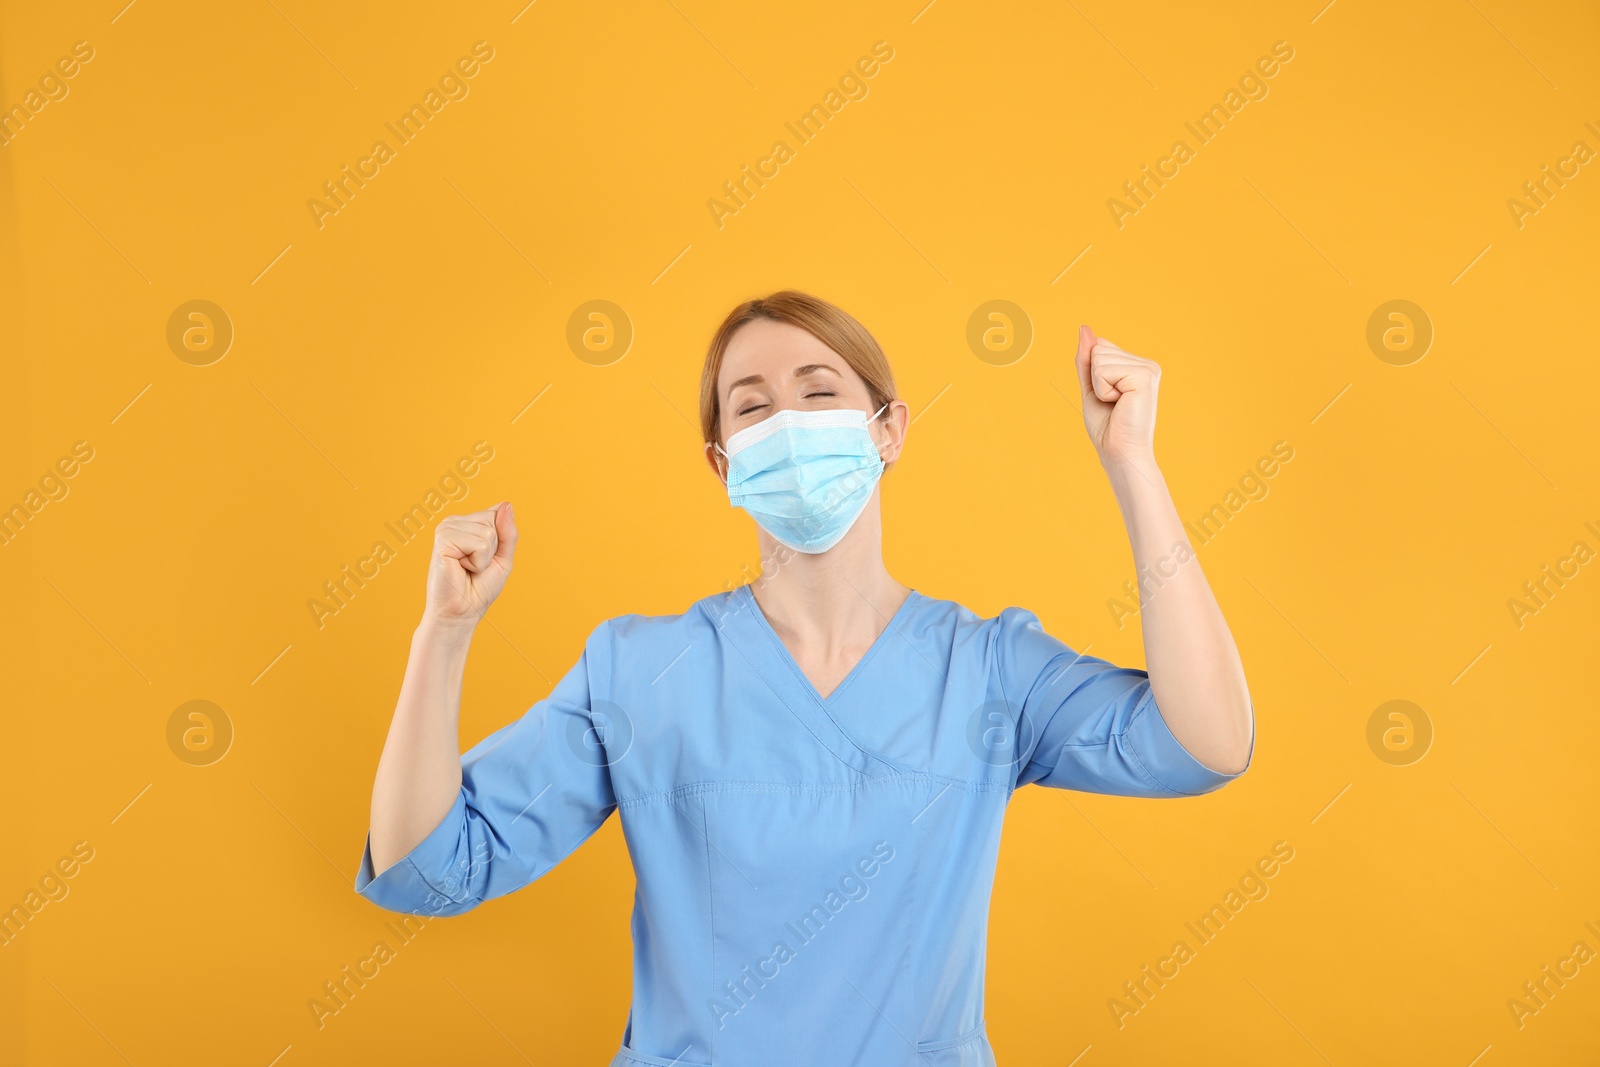 Photo of Emotional doctor with protective mask on yellow background. Strong immunity concept